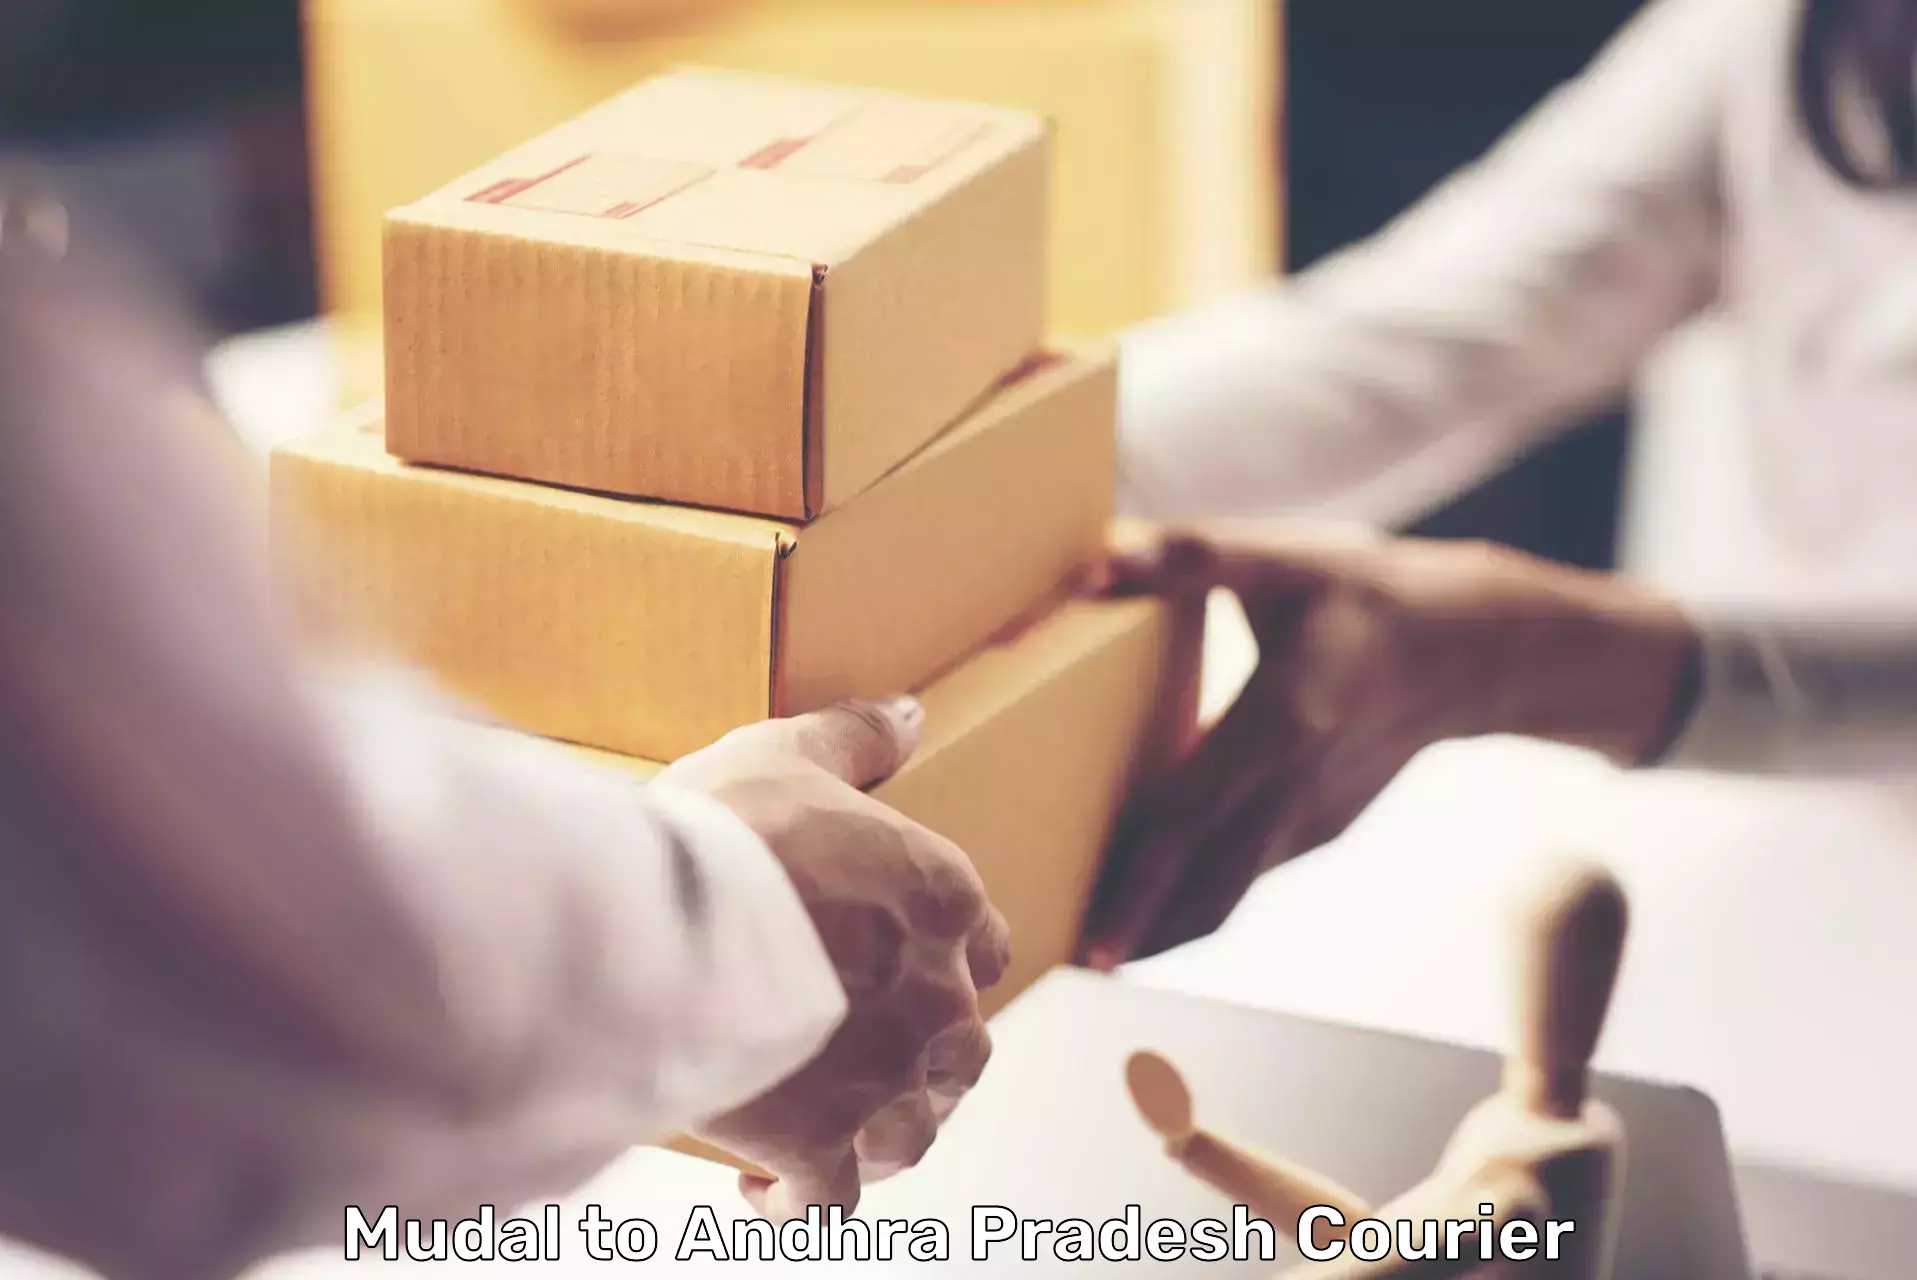 Custom courier packages Mudal to Andhra Pradesh